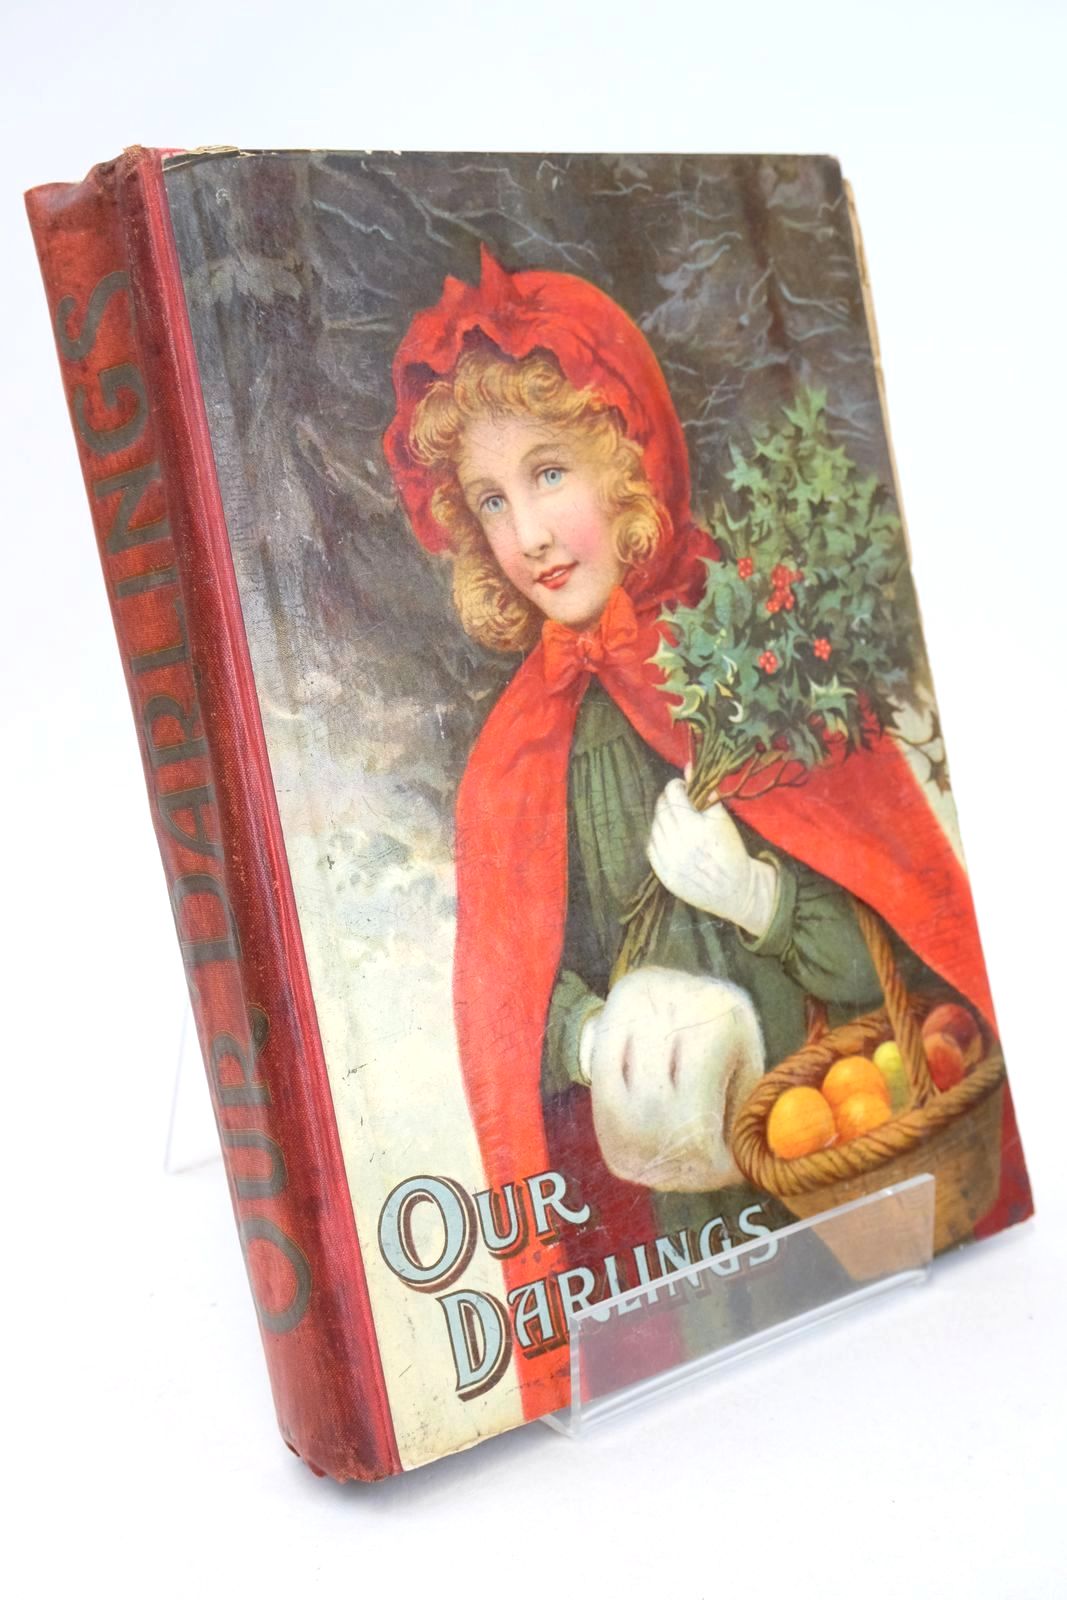 Photo of OUR DARLINGS - 31ST VOLUME written by Comrie, M.S. Shaw, Catharine Atkinson, W.A. Mackintosh, Mabel et al, illustrated by Helmer, Levine Howard, Fred S. Peachey, D. Gladwin, May et al., published by John F. Shaw &amp; Co. (STOCK CODE: 1325926)  for sale by Stella & Rose's Books